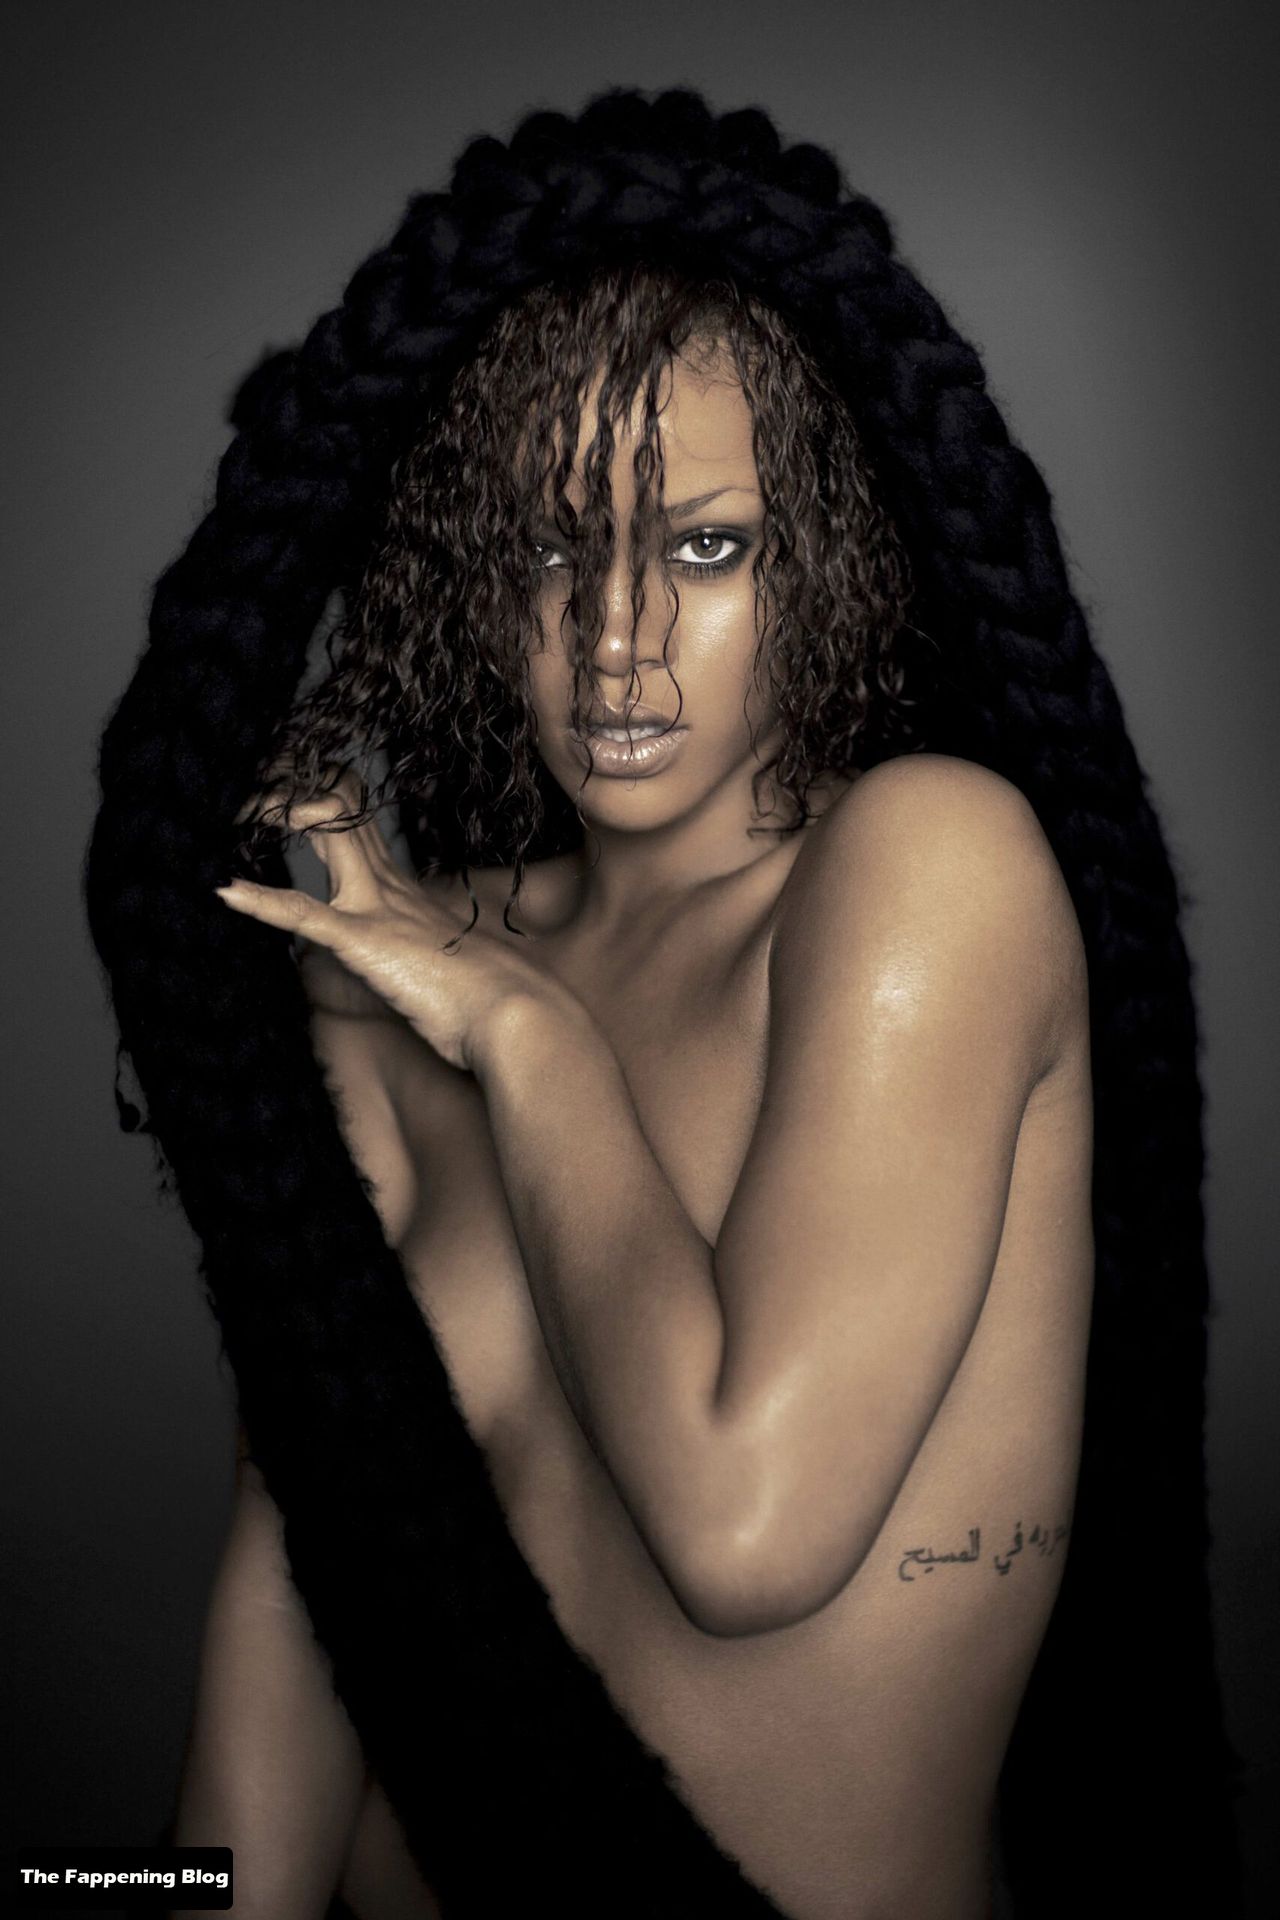 The-Fappening-Star-and-Singer-Rihanna-Shows-Off-Her-Gorgeous-Body-in-a-Sexy-Naked-Esquire-Magazine-Photoshoot-Outtakes-November-2011-13-thefappeningblog.com_.jpg